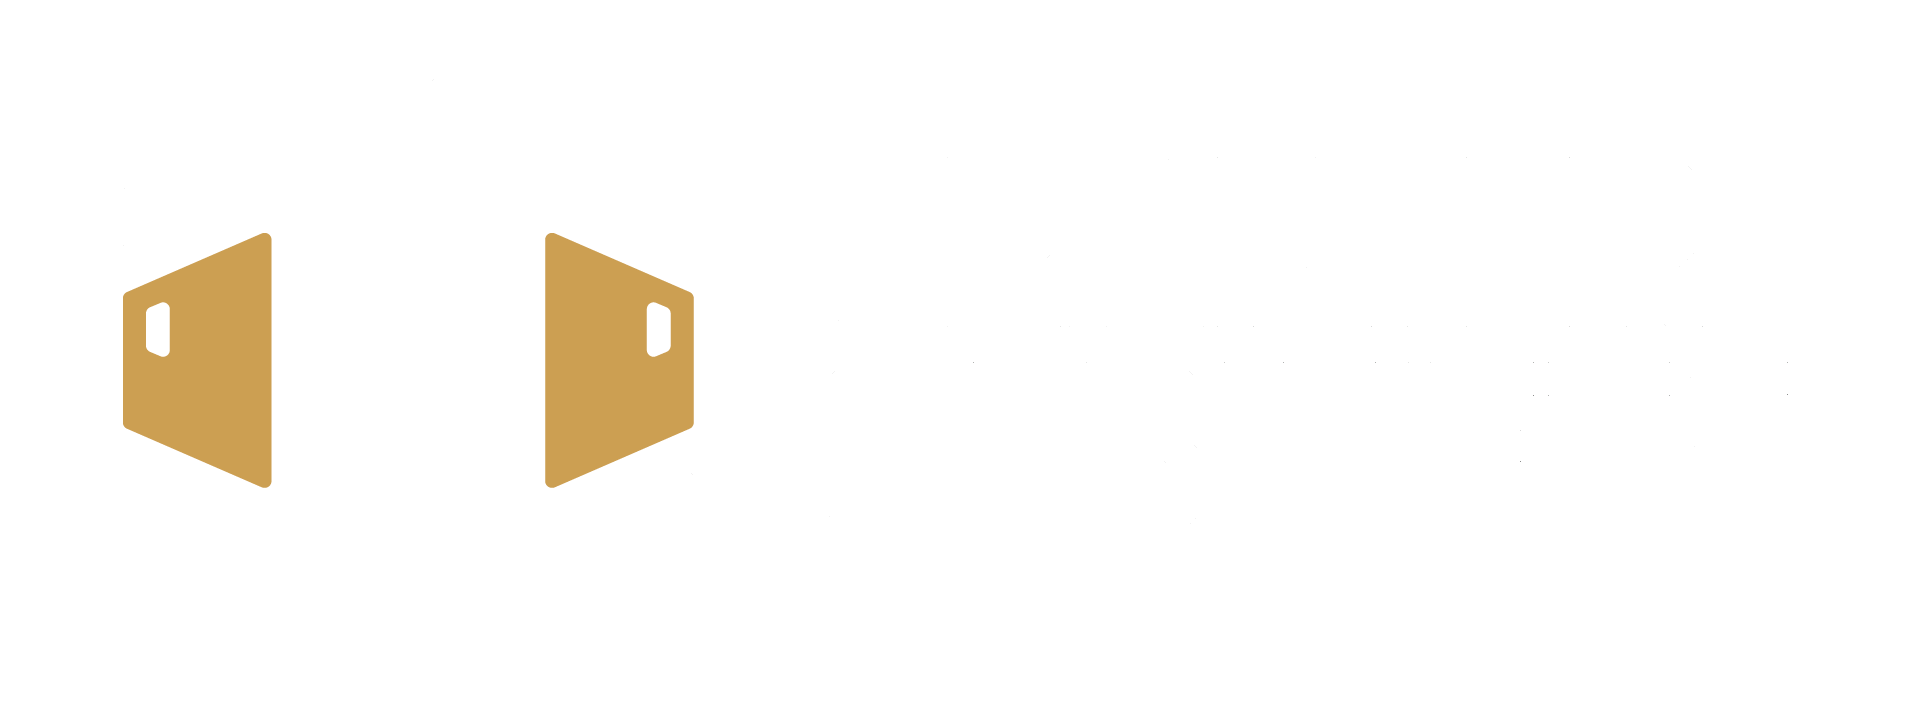 Crafter Cabinets